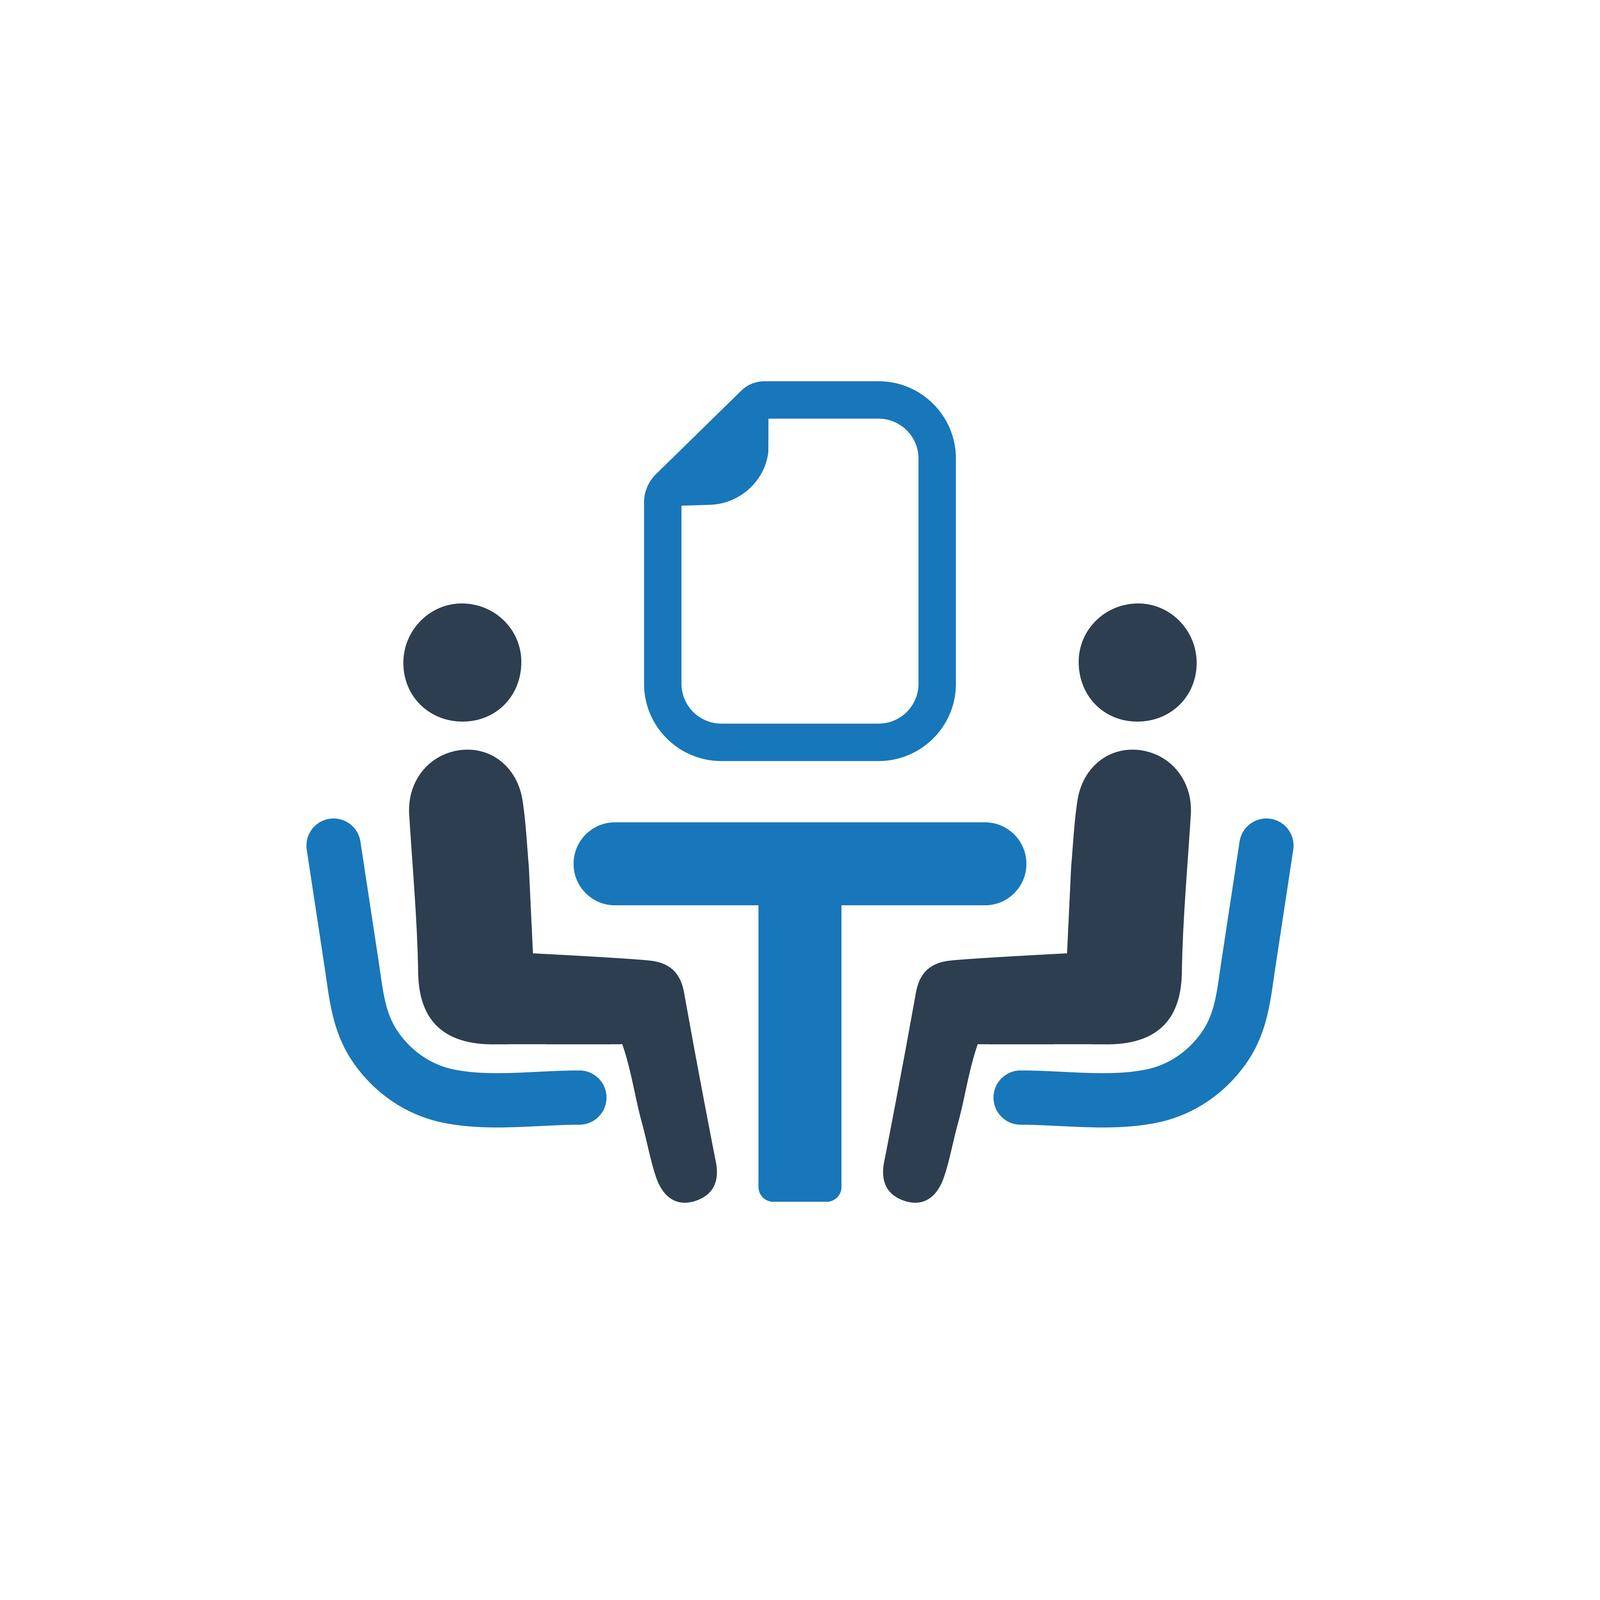 Business Contract icon. Vector EPS file.